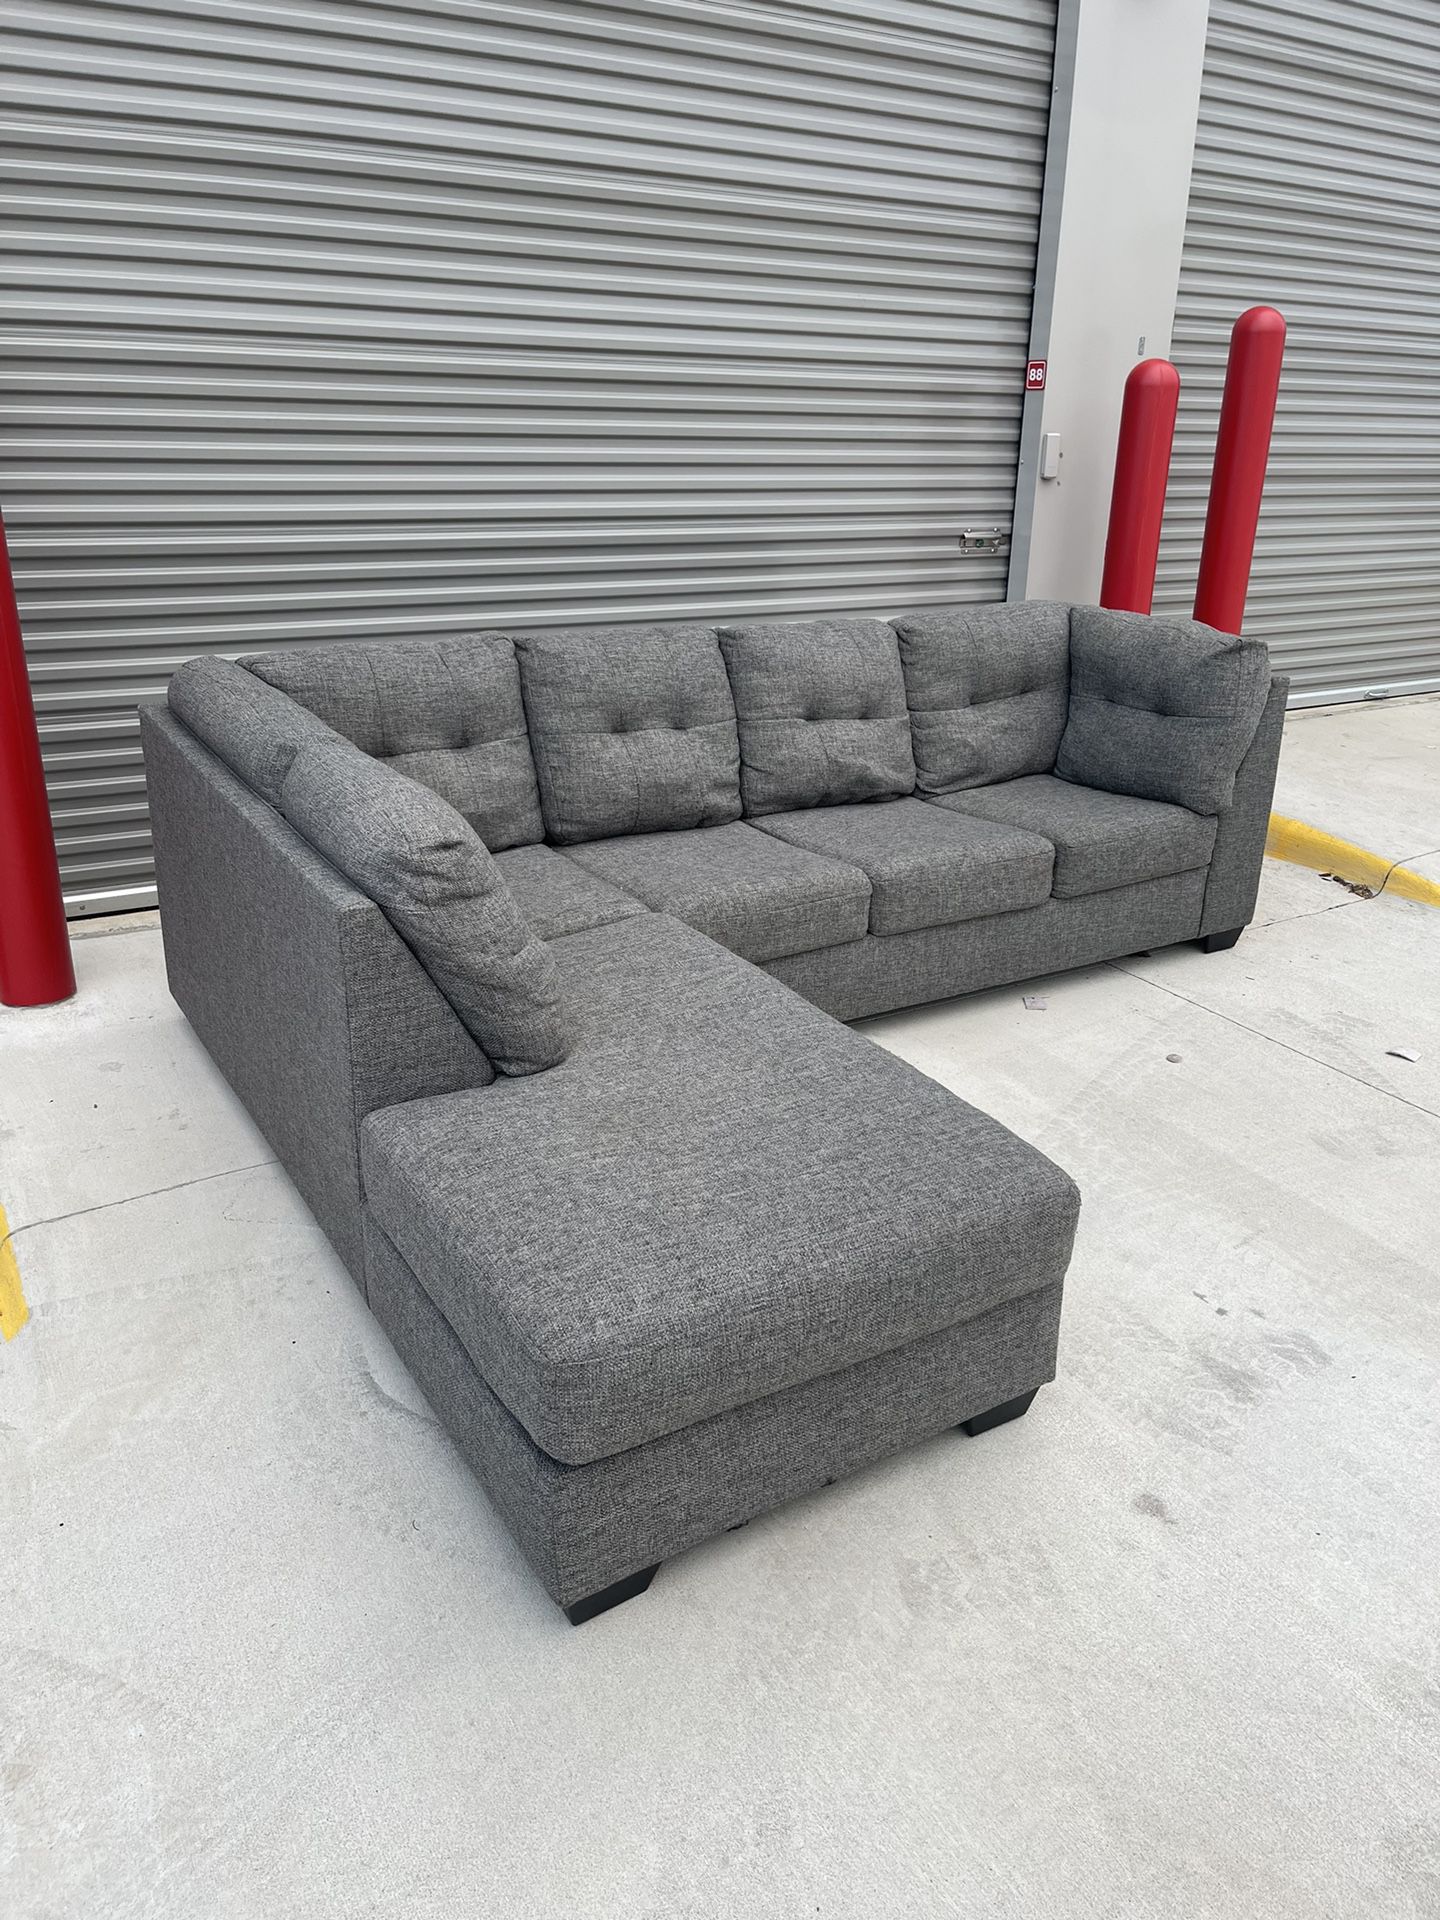 Smoke Grey Sectional Couchj